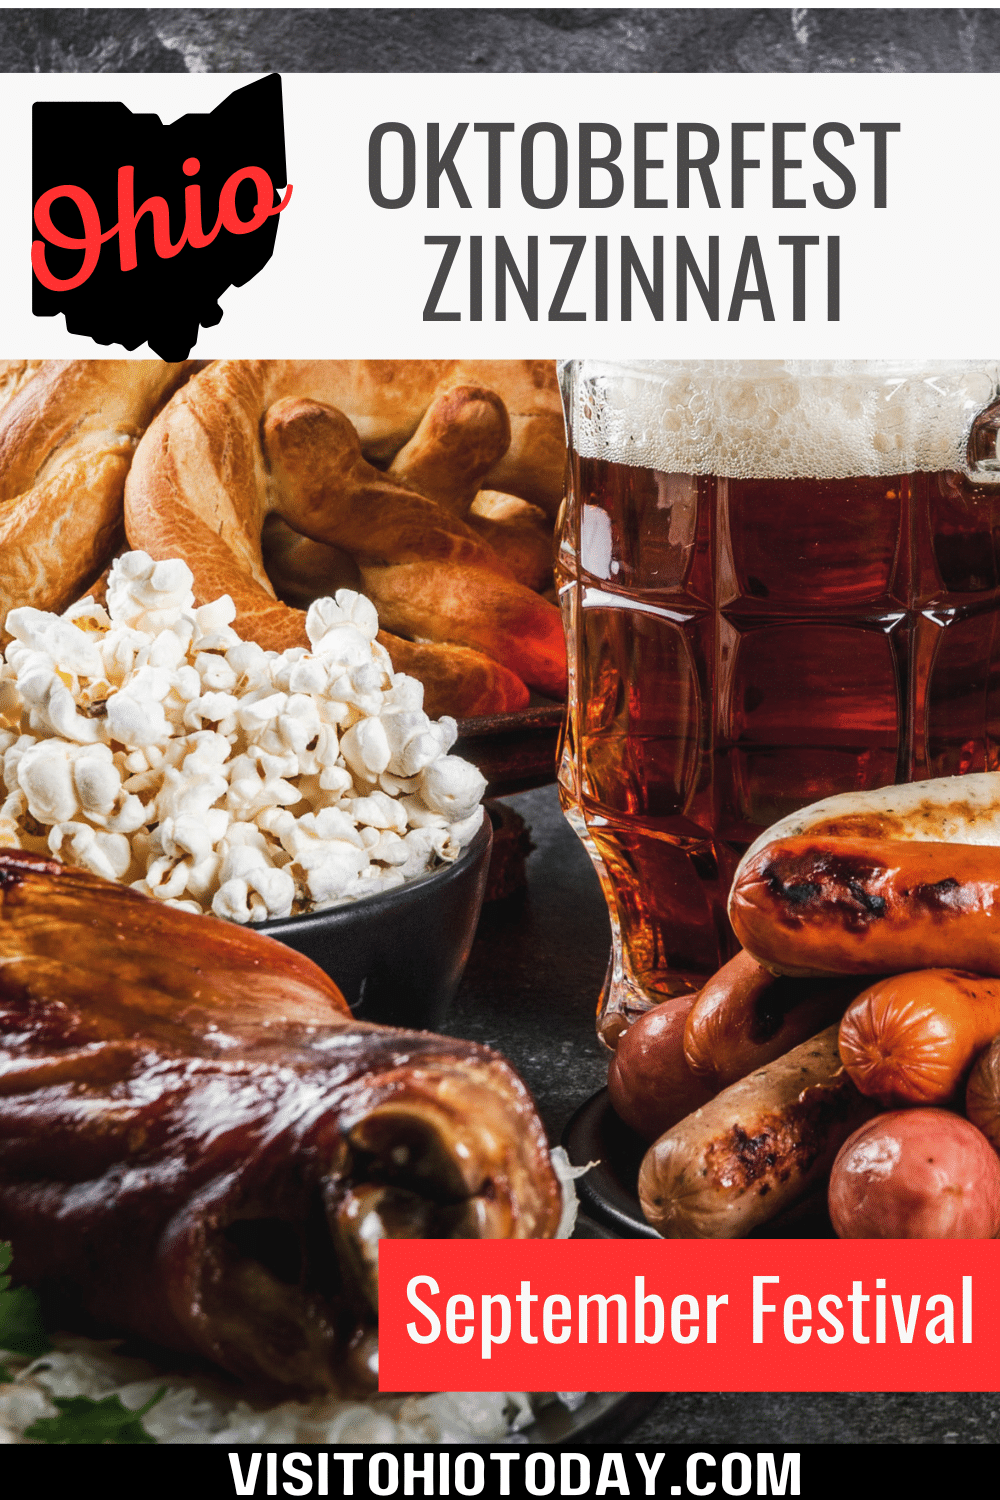 Oktoberfest Zinzinnati, held at downtown Cincinnati’s 5th Street, is the nation’s largest Oktoberfest. Held on September 14-17, 2023, this normally 3-day event has been extended by one day!